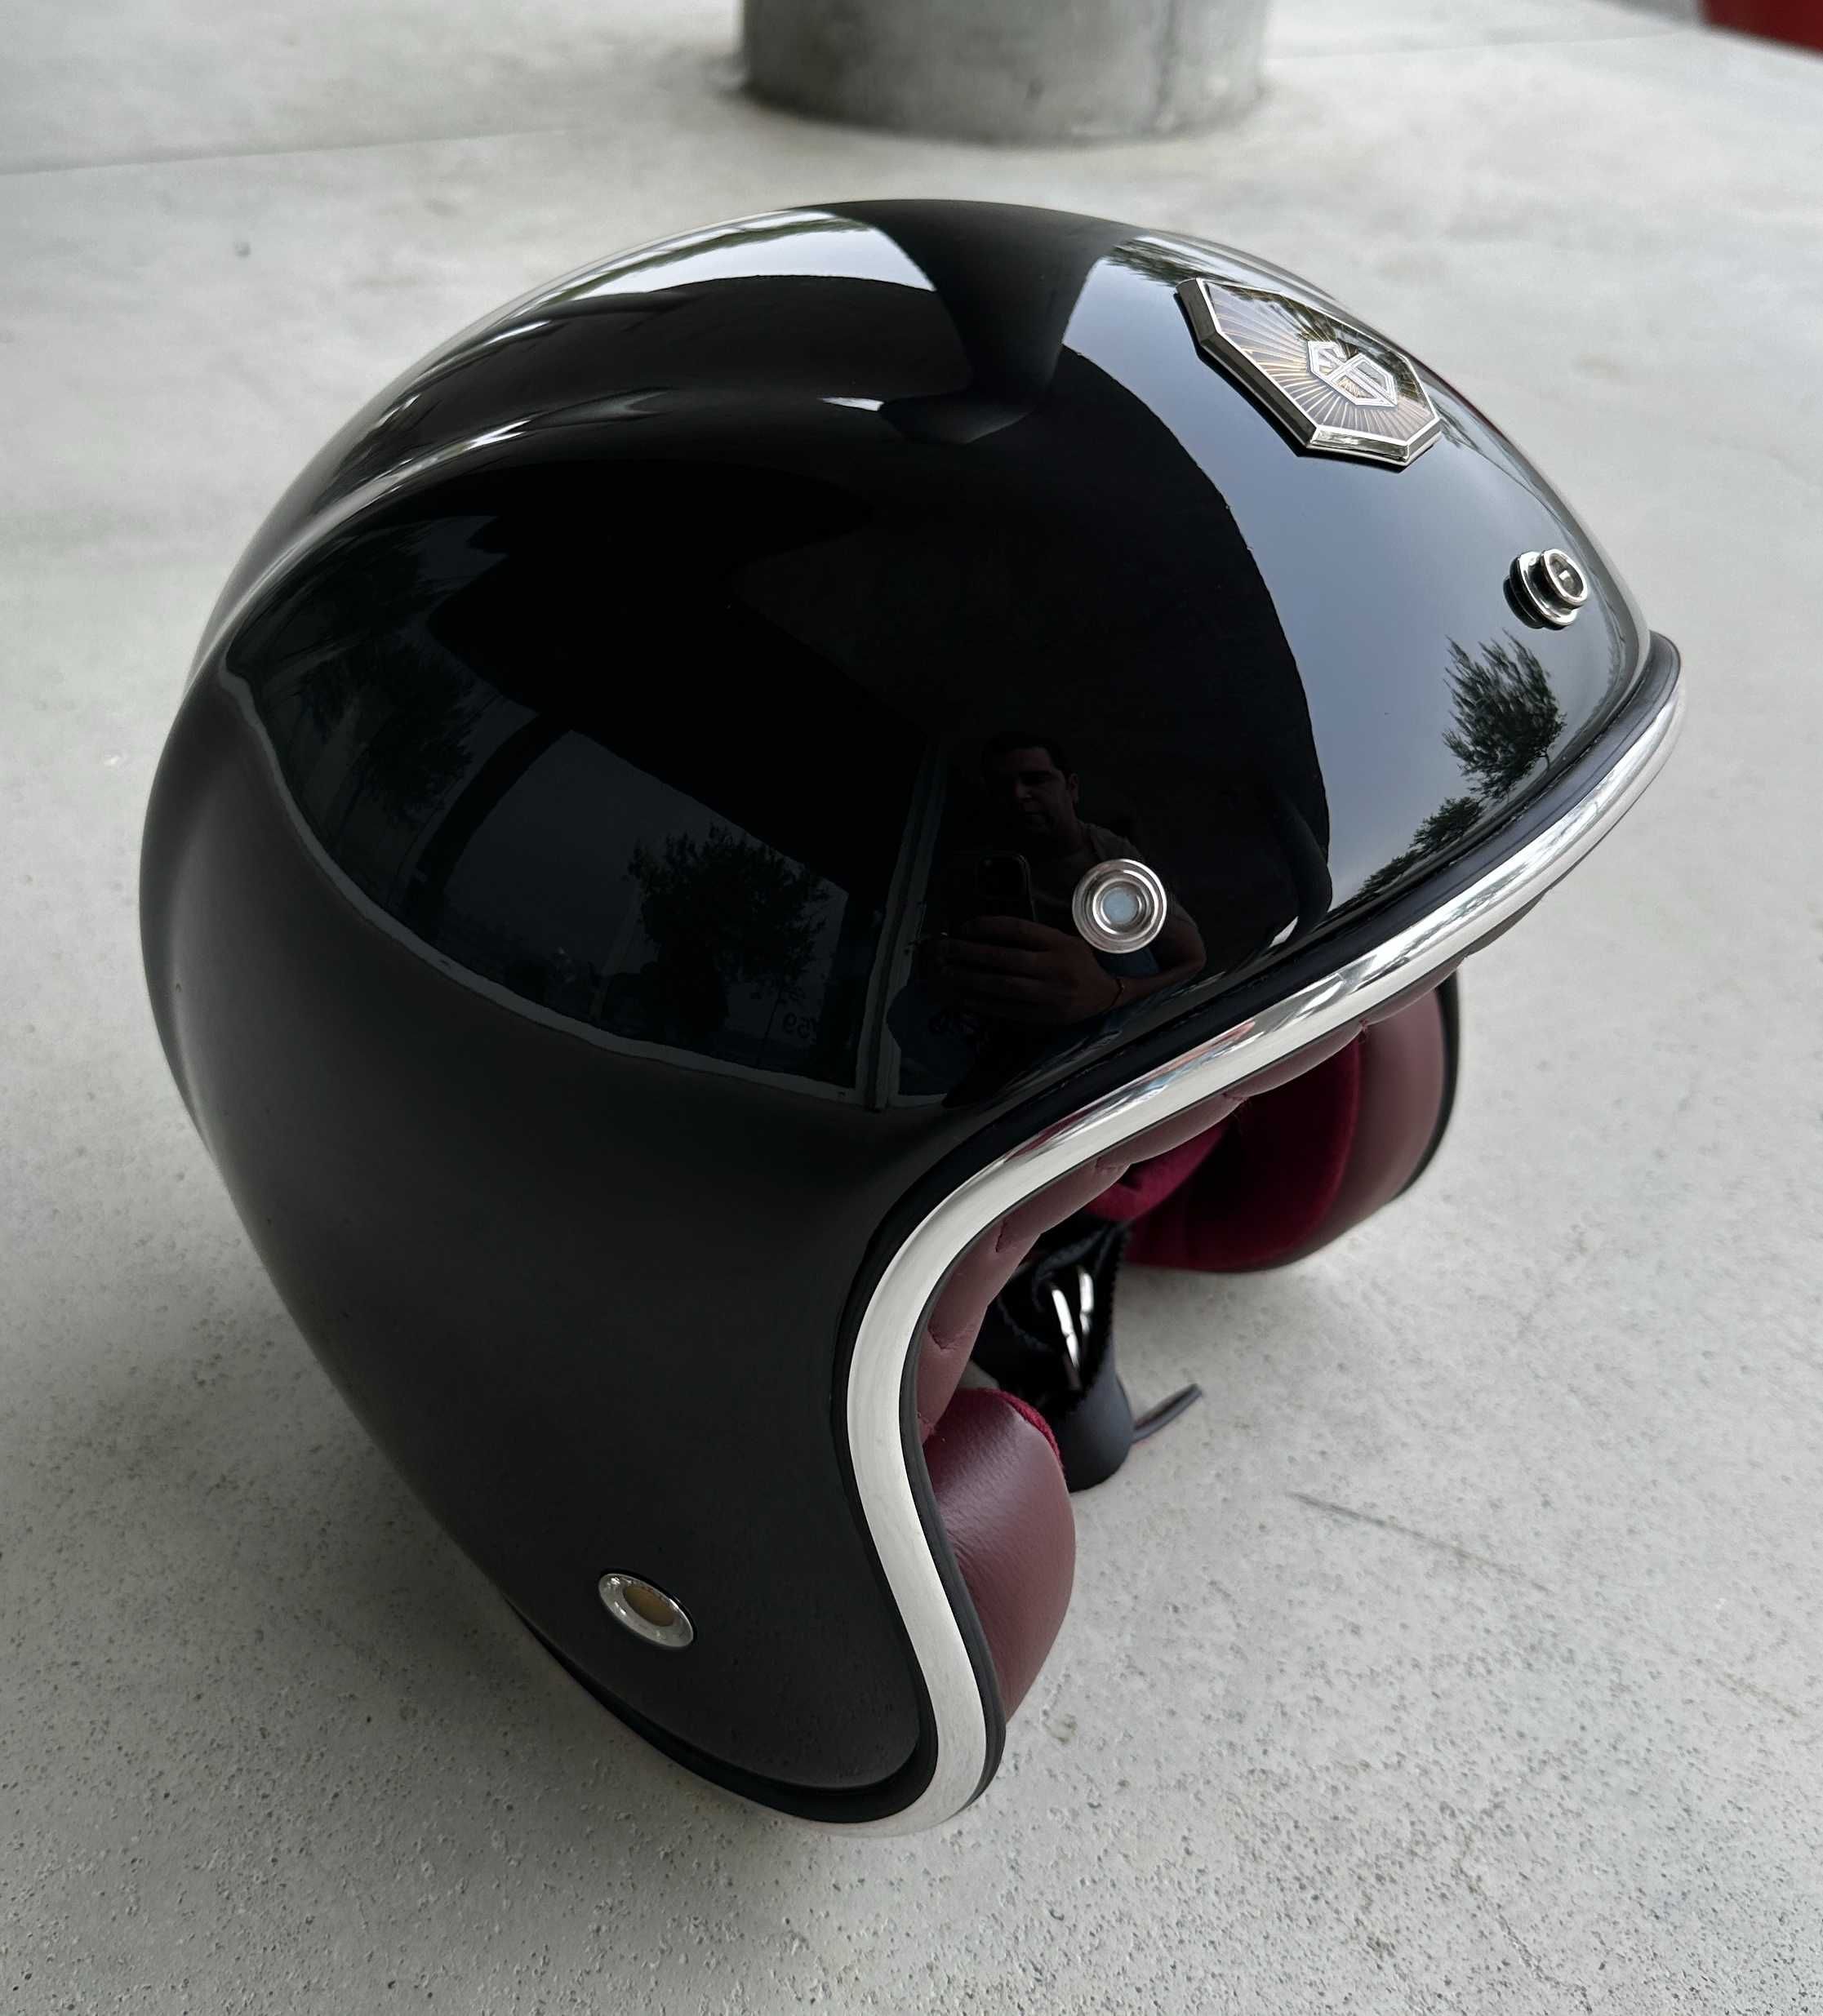 Capacete GUANG Open Face Glossy - Novo